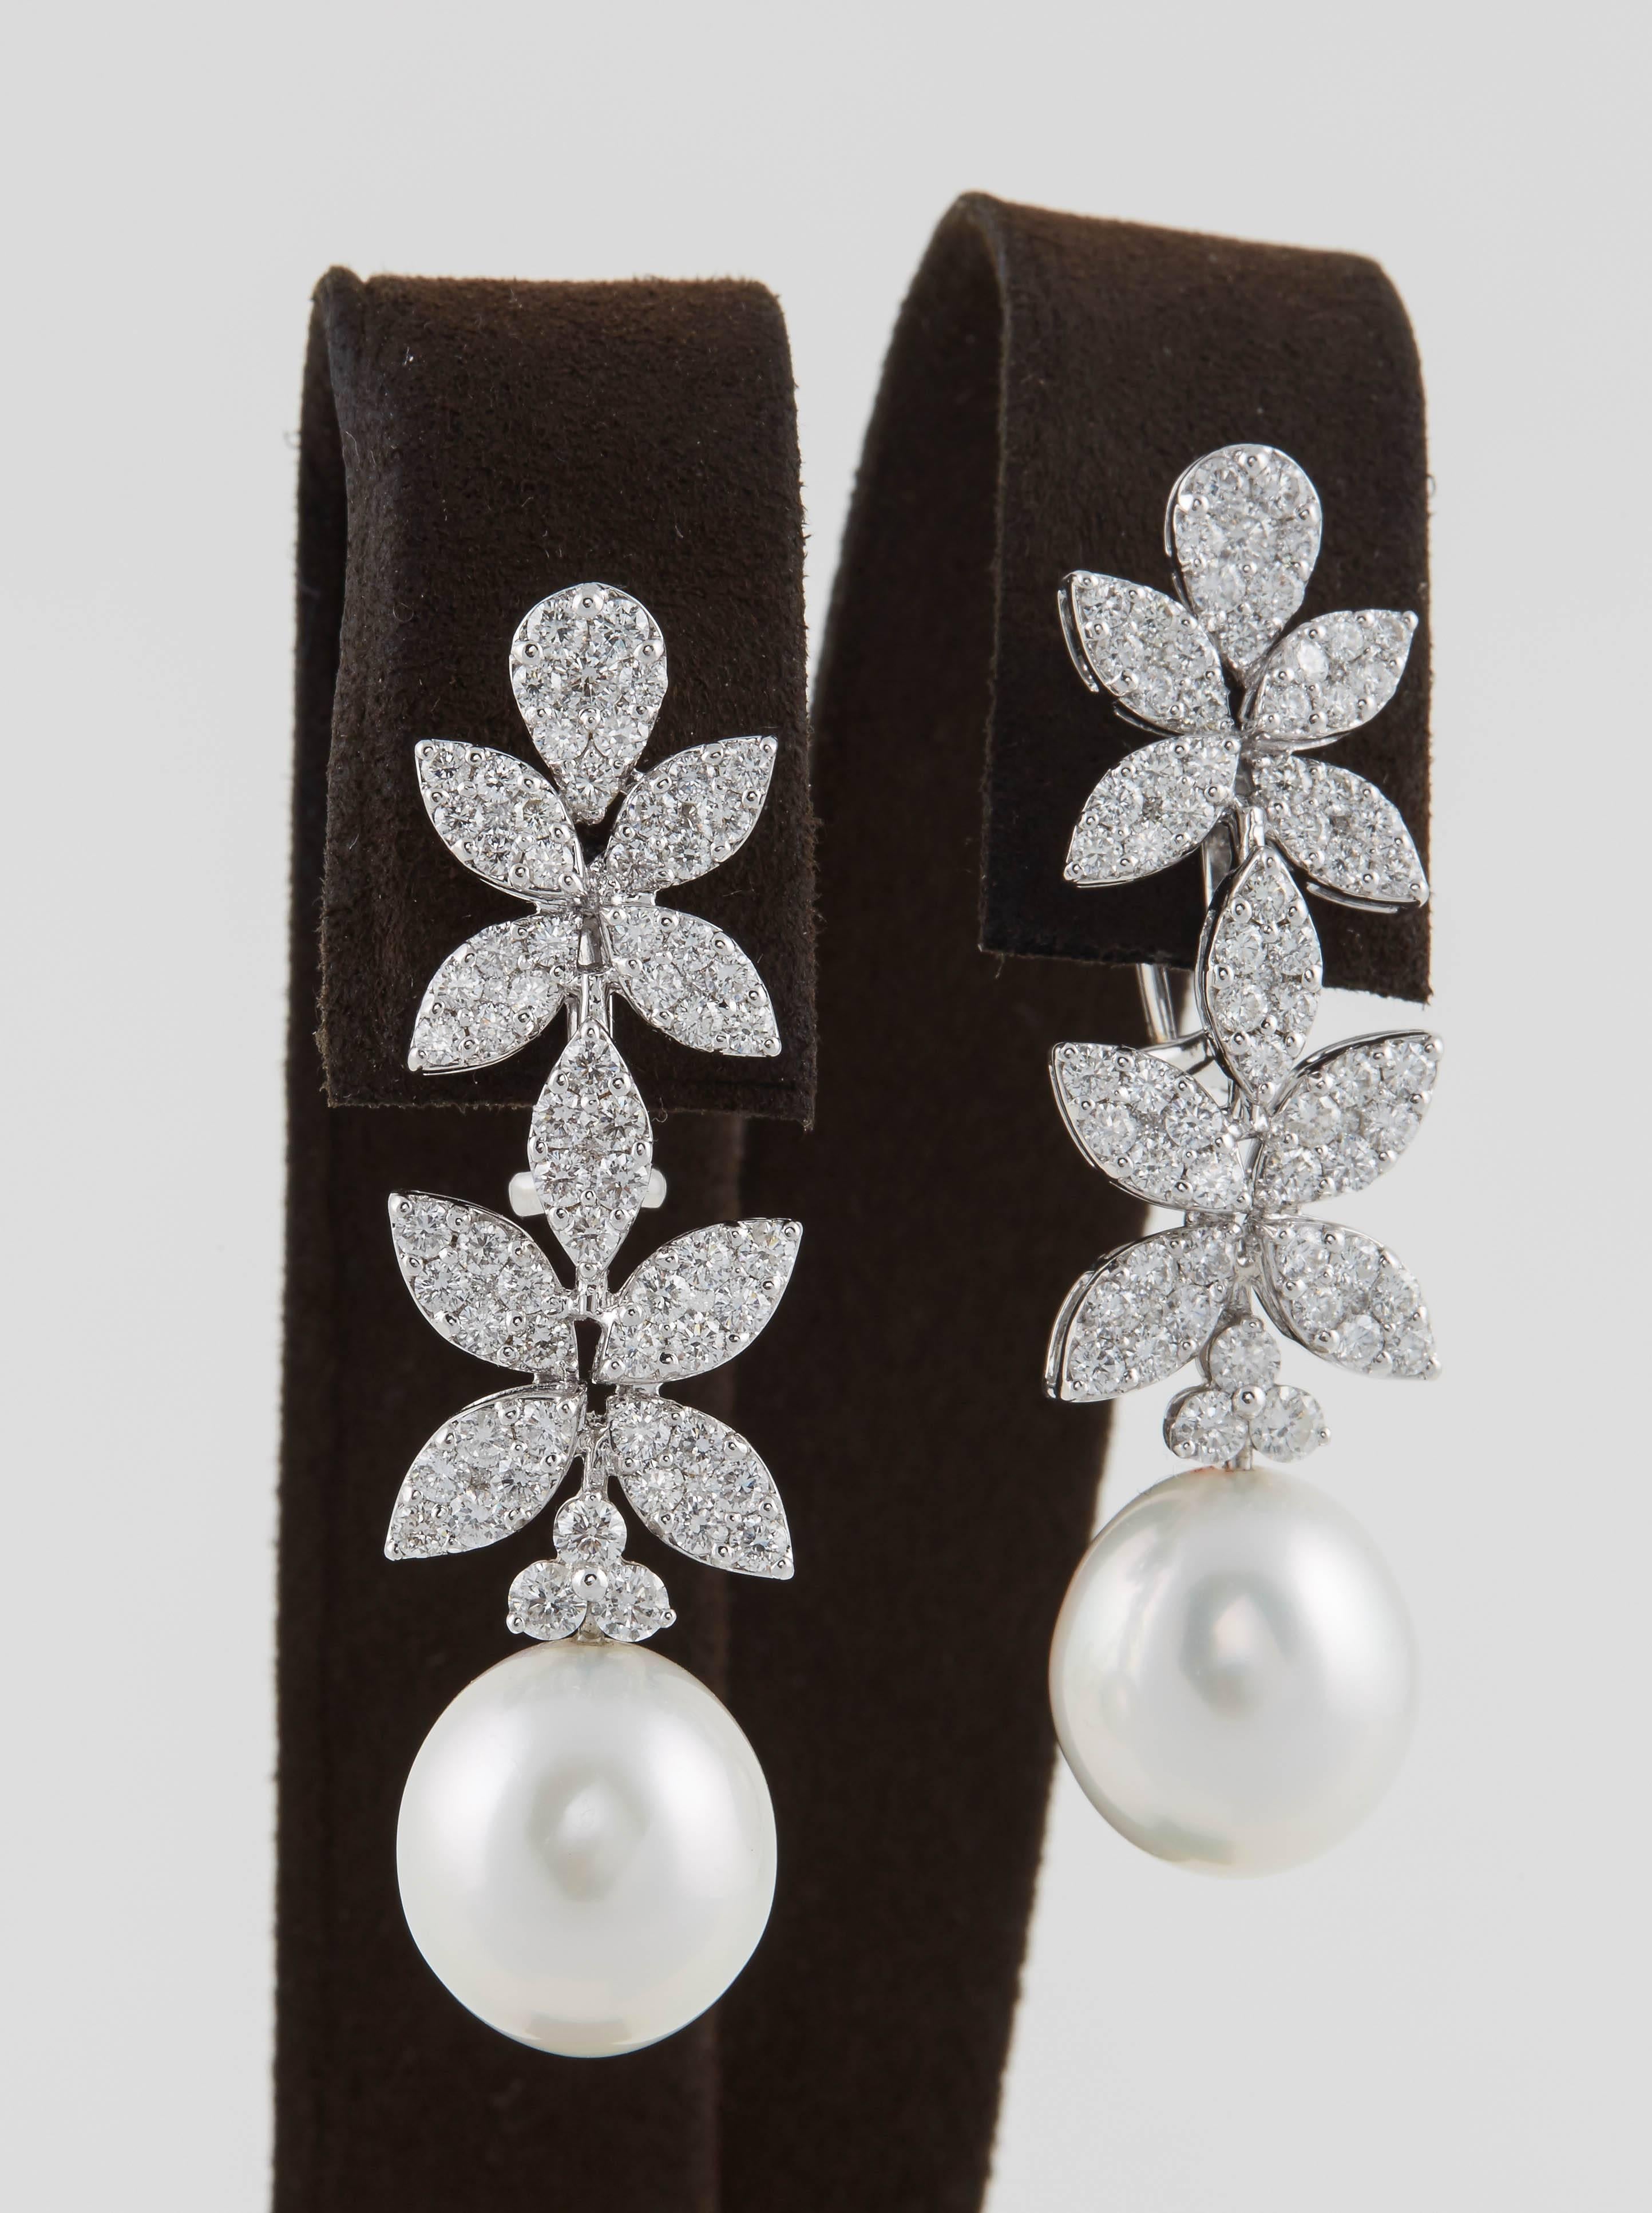 

A beautiful pearl and diamond earring with tons of sparkle!

3.37 carats of white round brilliant cut diamonds set into marquise and pear shaped designs. 

Approximately 12 mm pearl drop.

18K white gold

The earrings measure approximately 1.88